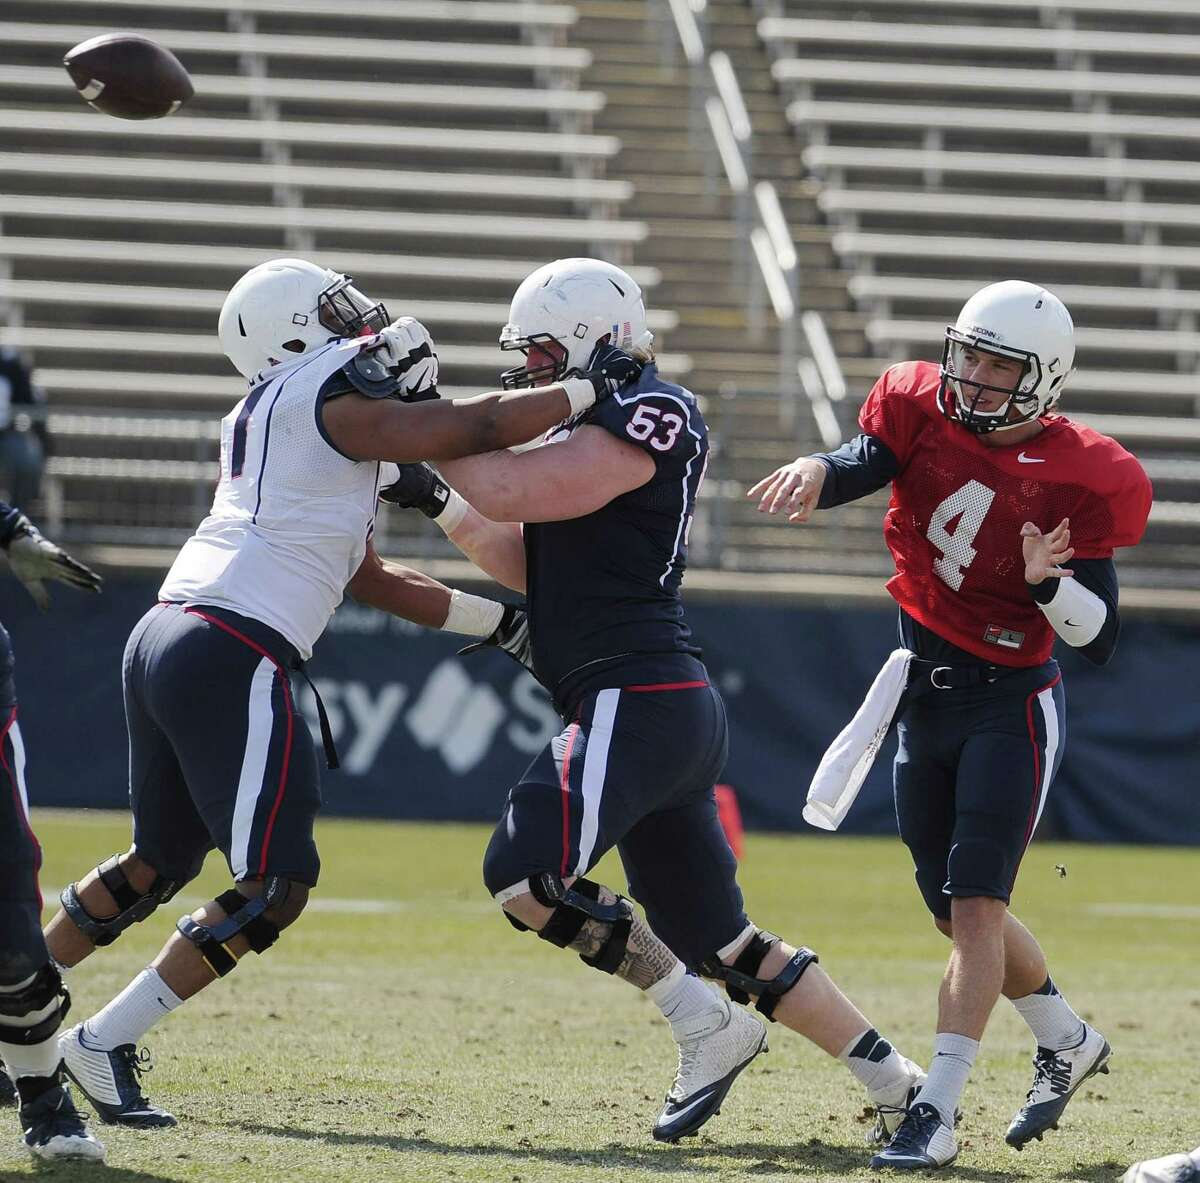 UConn quarterback Bryant Shirreffs throws over White’s Omaine Stephens, left, and Blue’s Andres Knappe during the first half of the annual Blue-White spring game on Saturday at Rentschler Field.